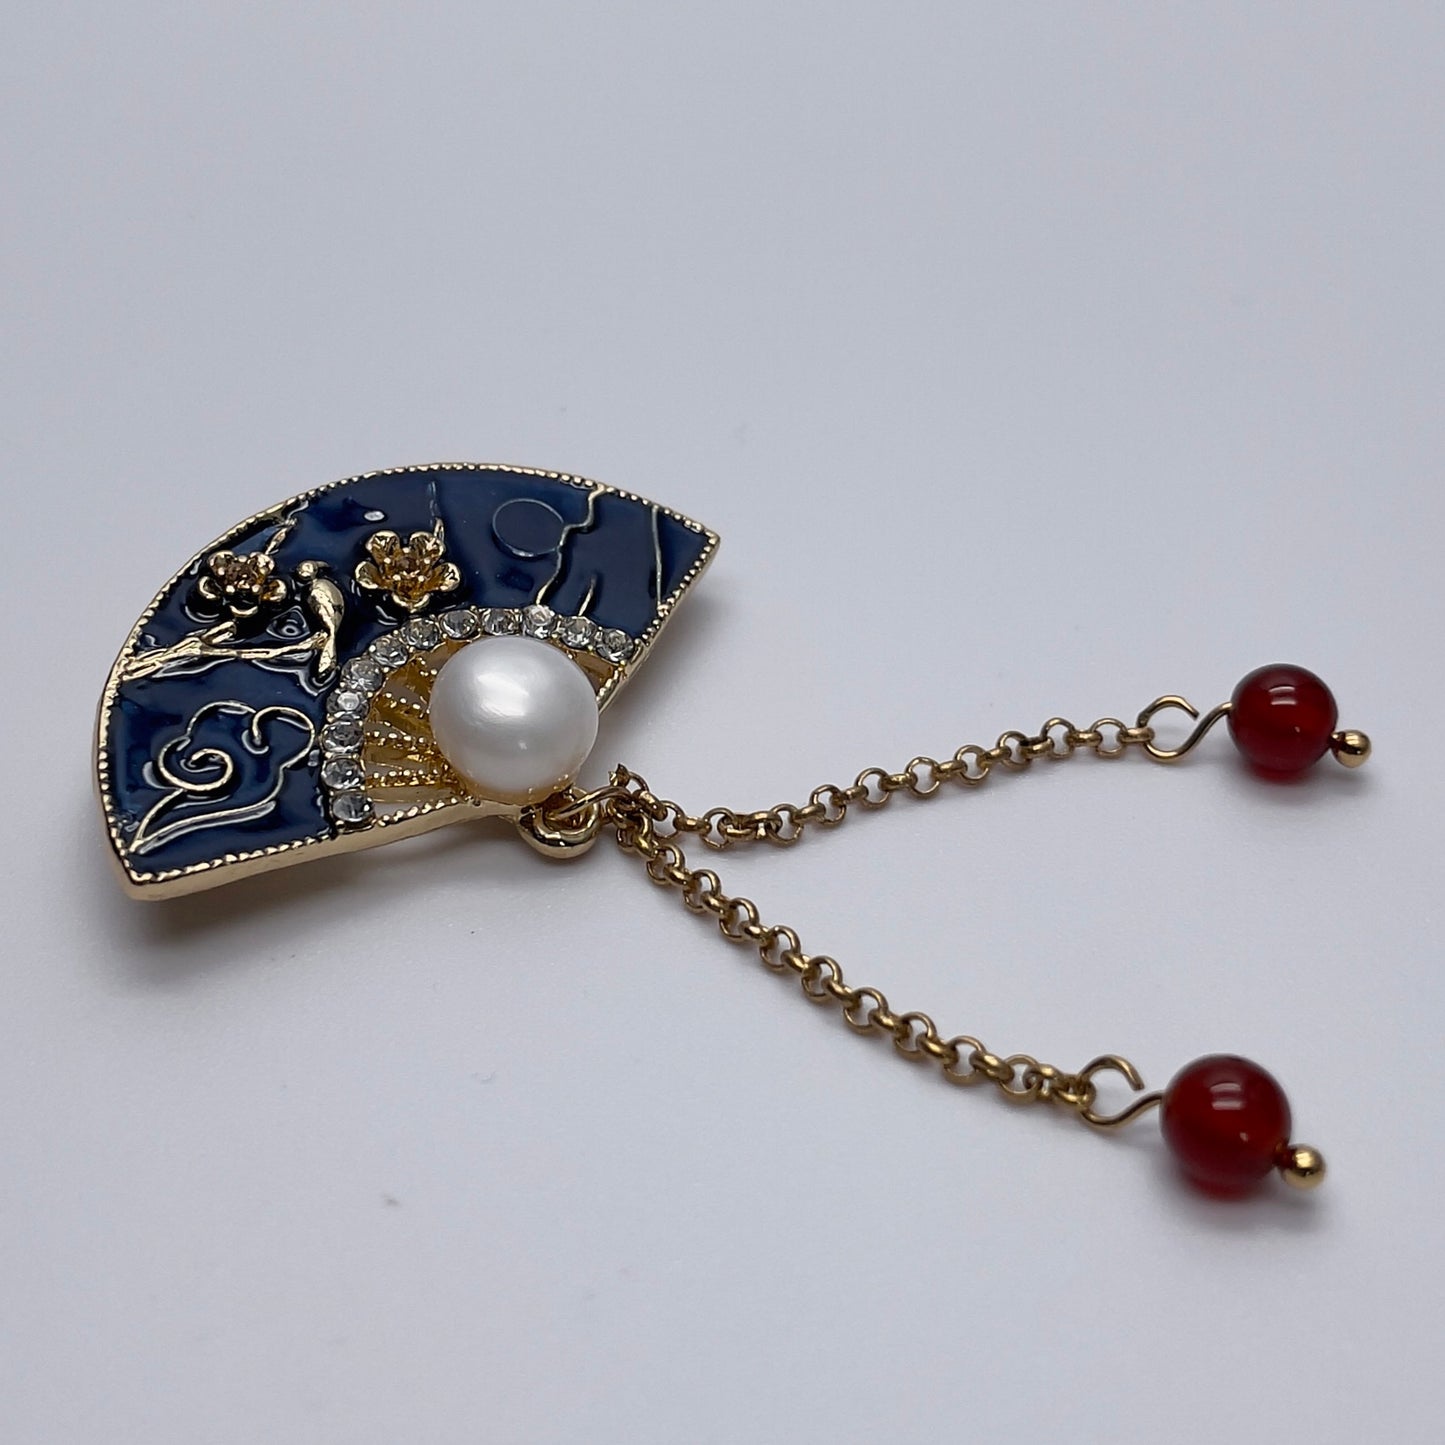 Stonelry Elegant Pearl Brooch Pin - Perfect for Adding a Touch of Glamour to Any Outfit